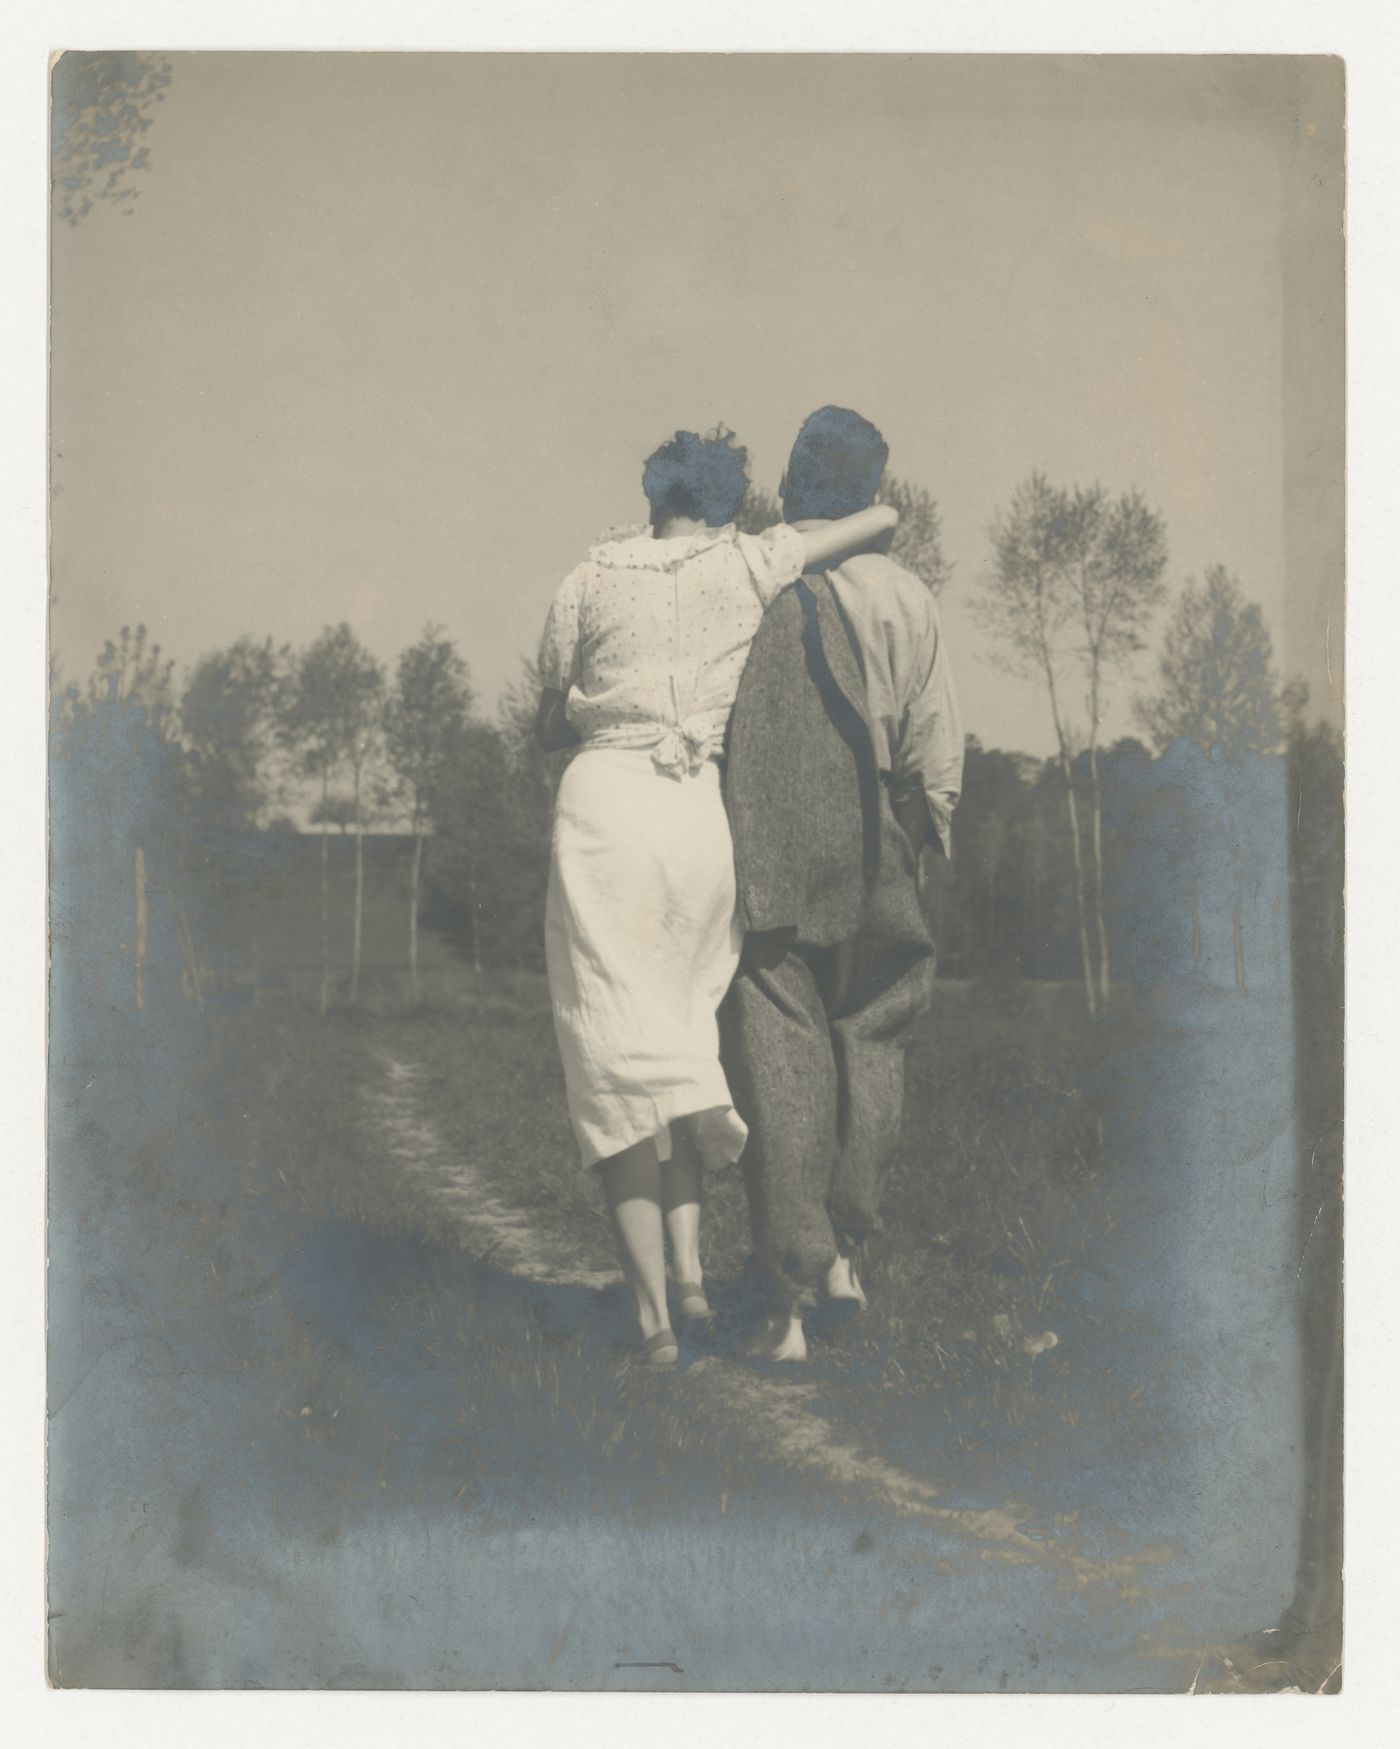 Photograph of Charlotte Perriand and an unknown individual